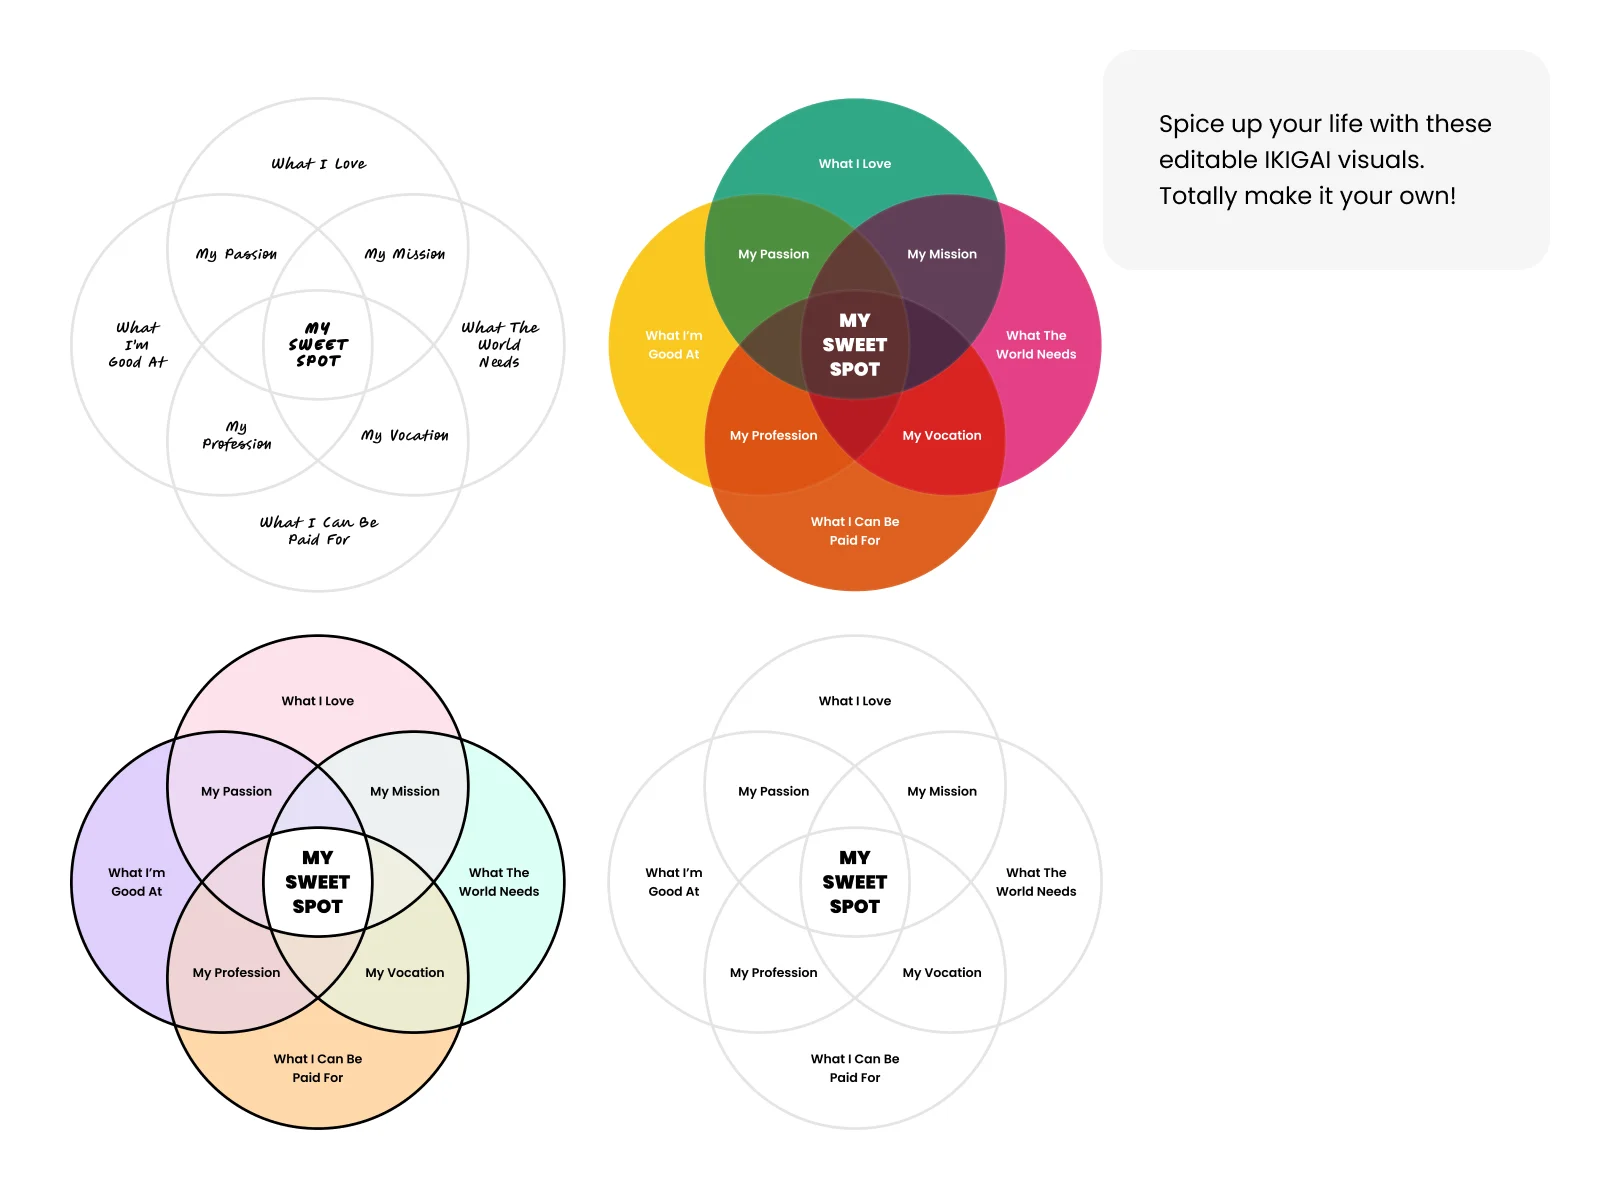 Personalize Your Life Journey with the Customizable IKIGAI Visual Tool